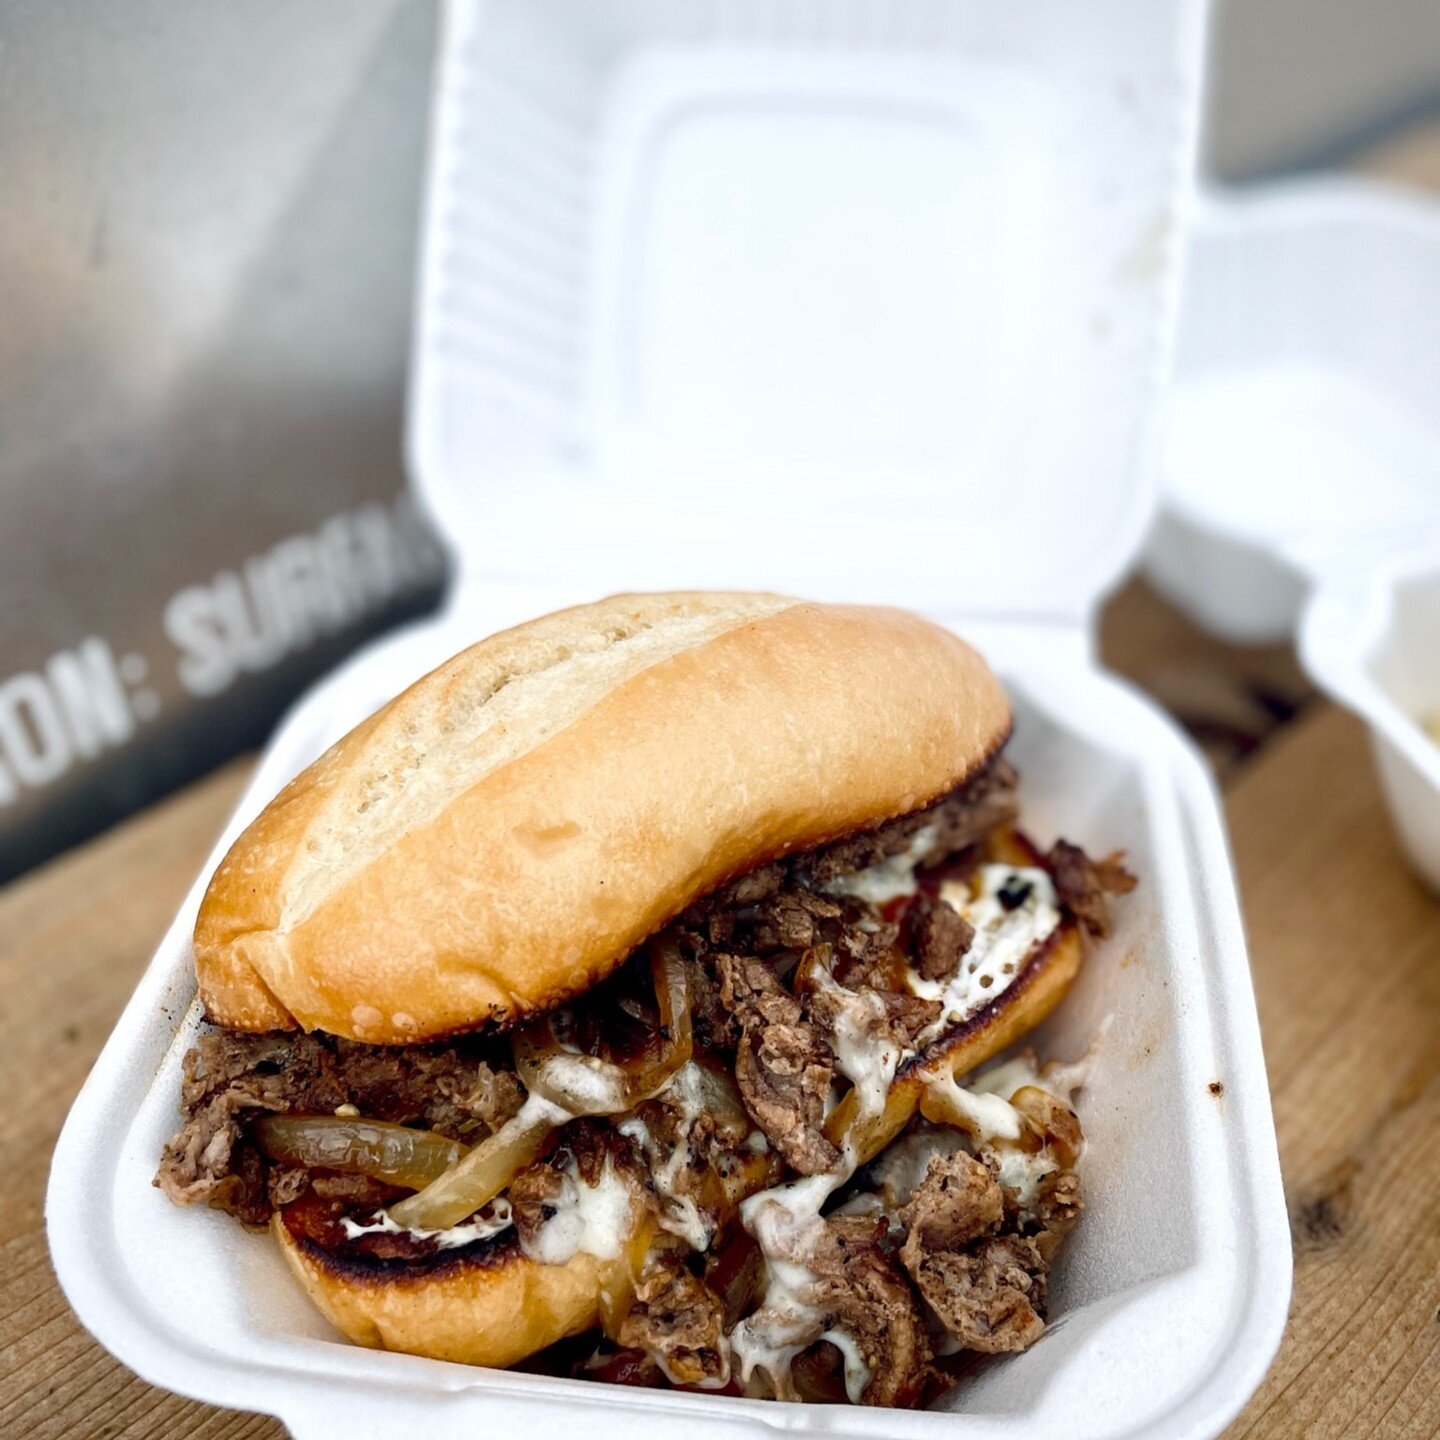 It's deep into autumn, and you know what we haven't done yet this season? Cheesesteaks!!!

Our most-requested chef special will be back this week while supplies last. Find the truck at 1701 E Center St. Warsaw 11-2pm Thursday and Friday, and at Two B